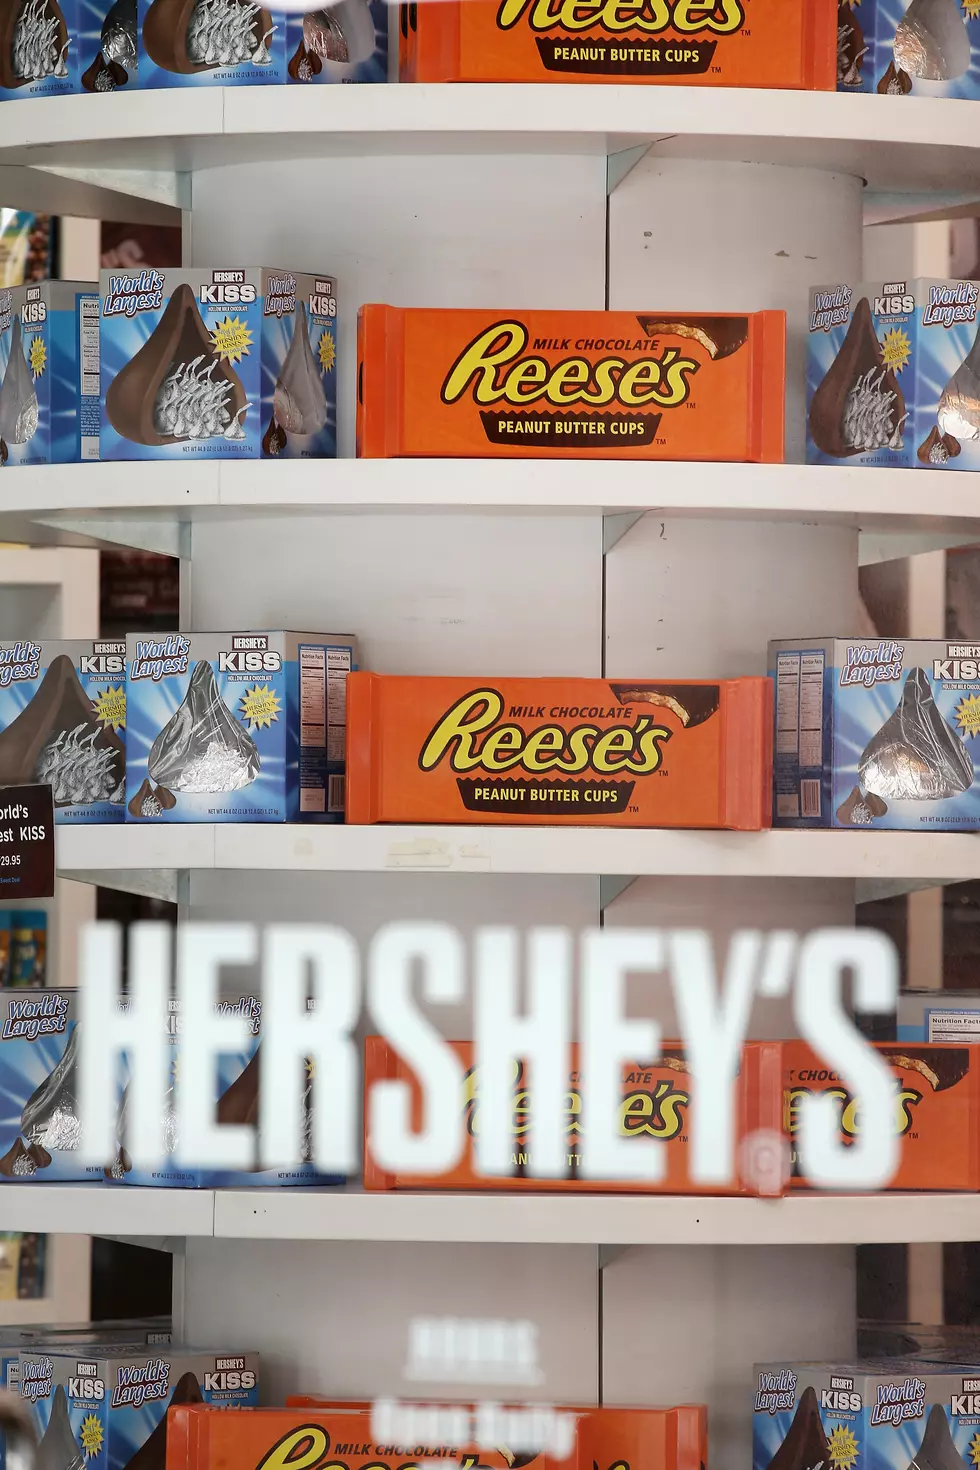 How Do You Pronounce the Name of Reese’s Candy Bars? [VIDEO+POLL]